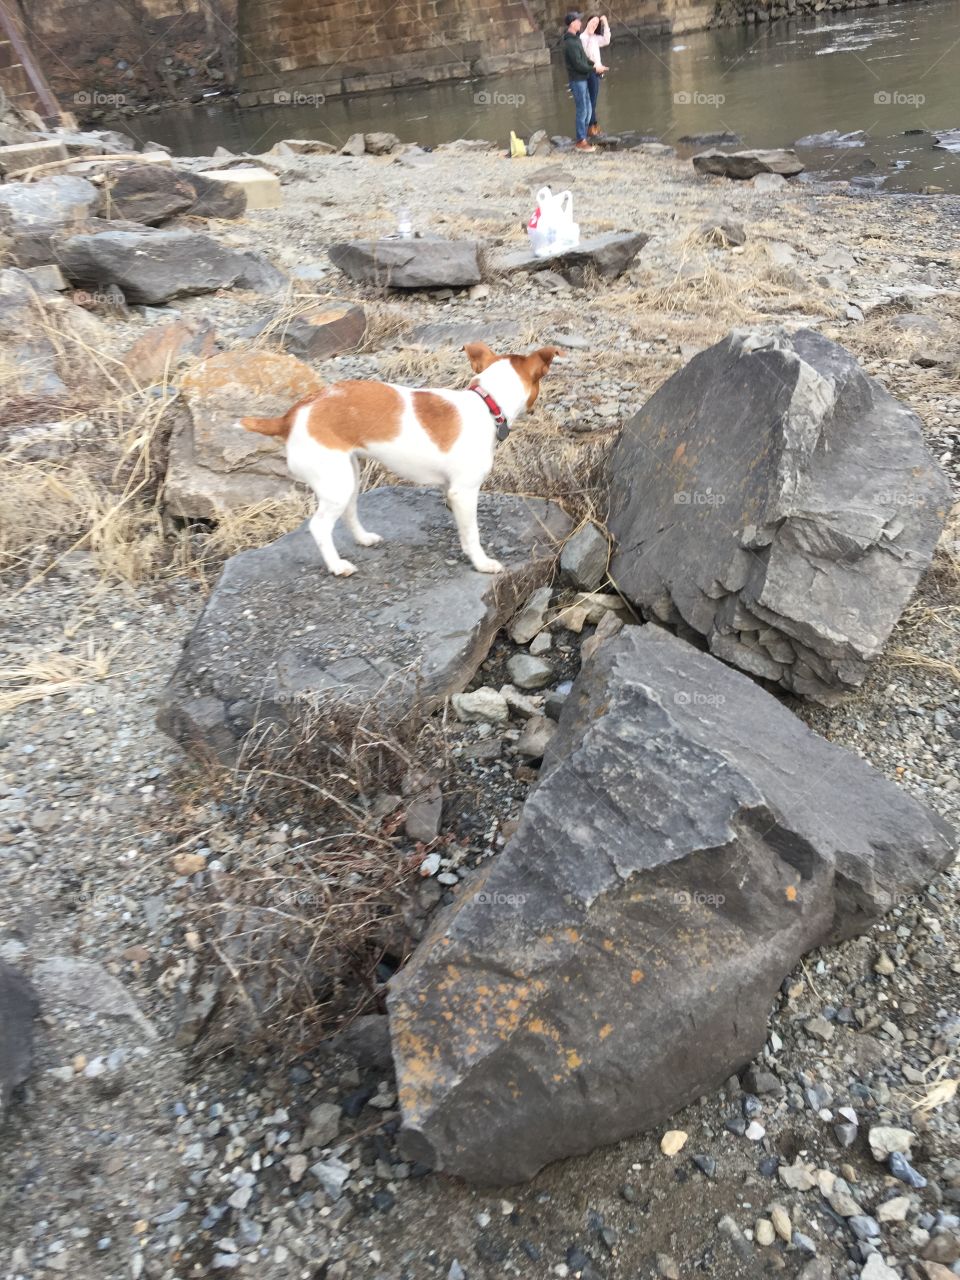 Cute little dog loved exploring in the rocks 